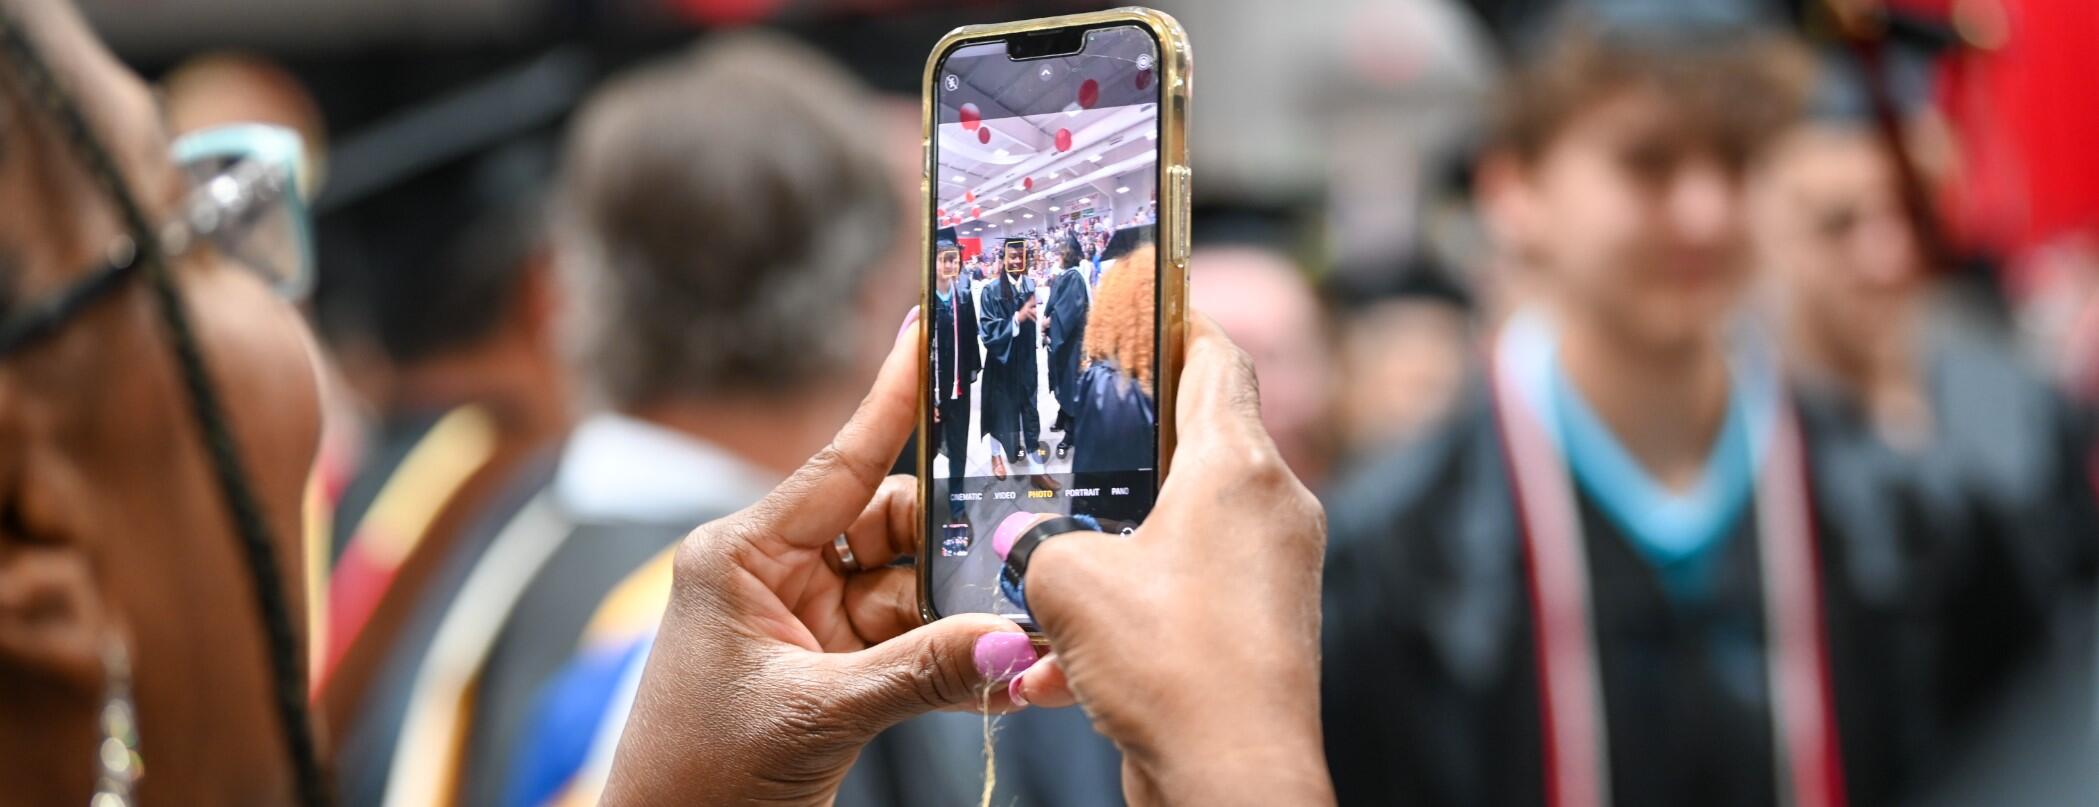 Parent Taking a Photo with her Phone at Graduation